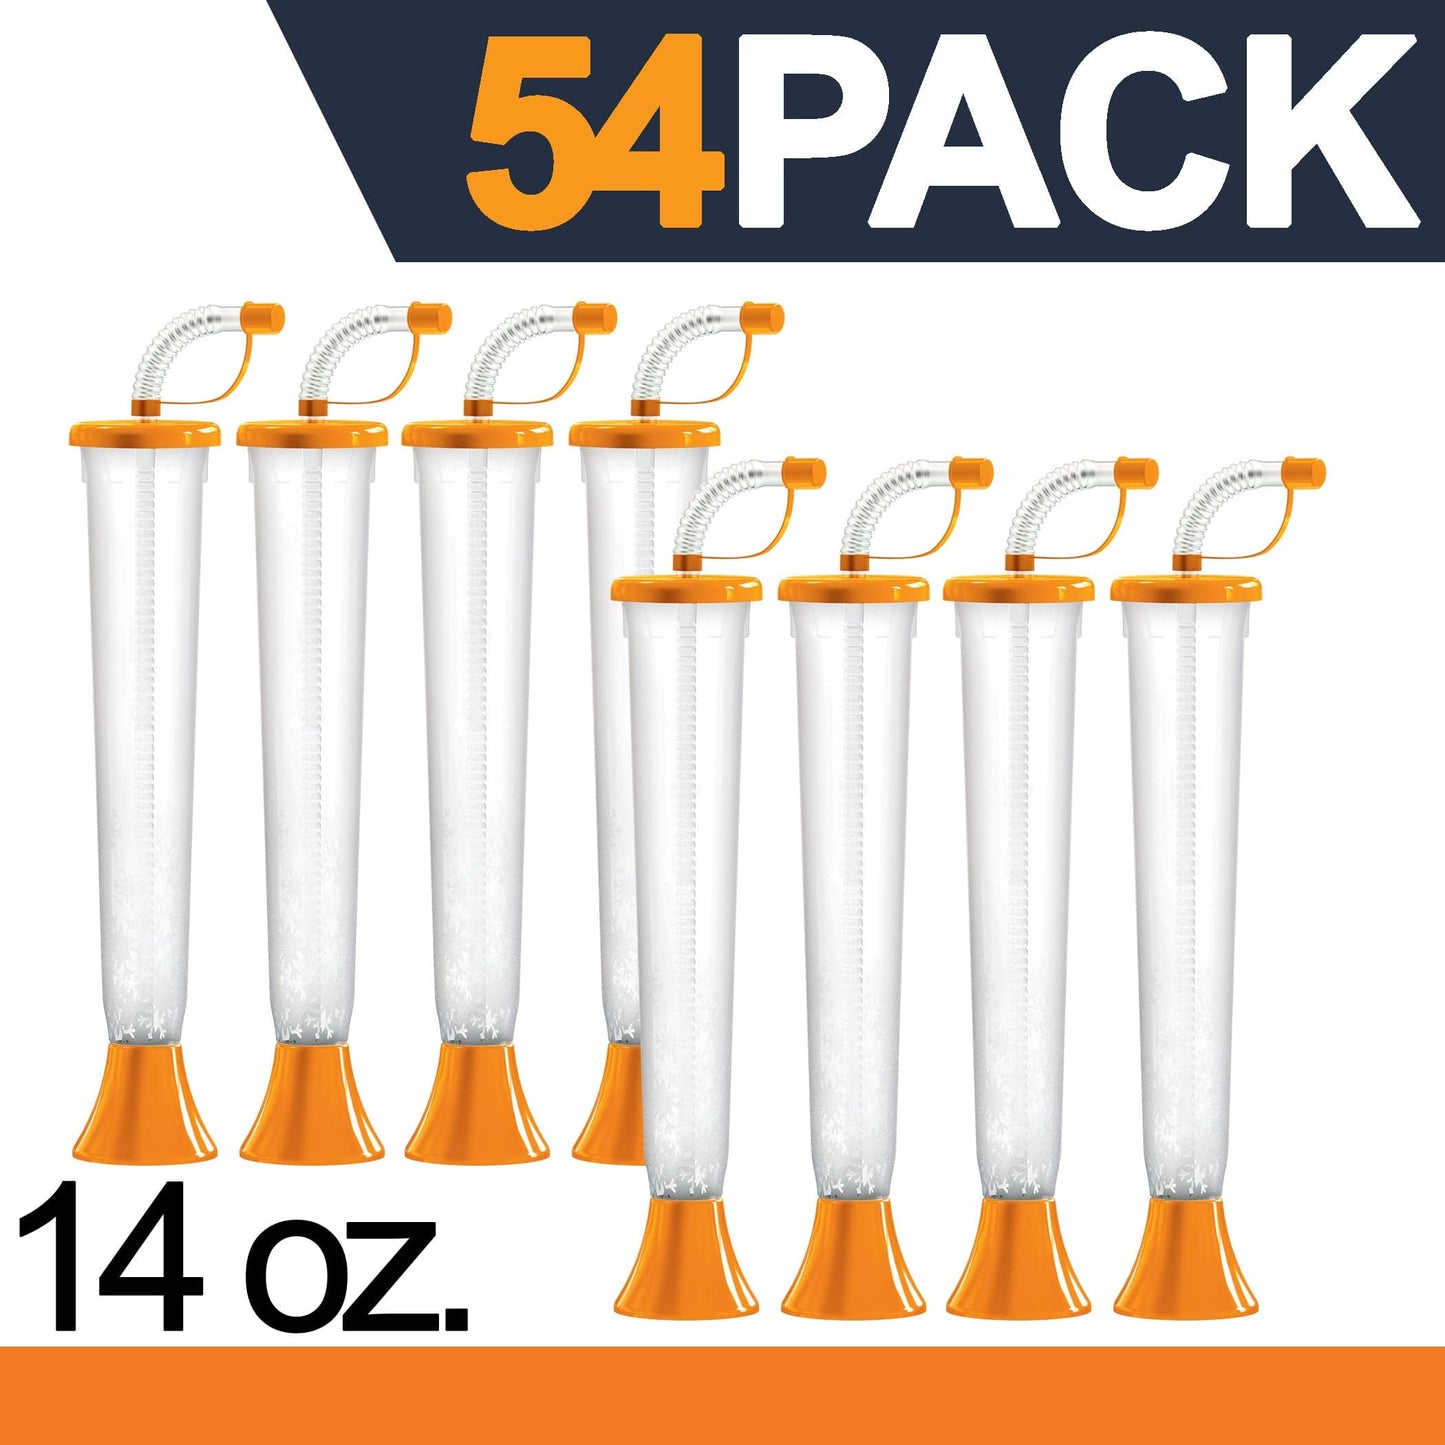 Sweet World USA Yard Cups 54 Cups Yard Cups with ORANGE Lids and Straws - for Margaritas, Cold Drinks, Frozen Drinks, Kids Party - 14 oz. (400 ml) cups with lids and straws